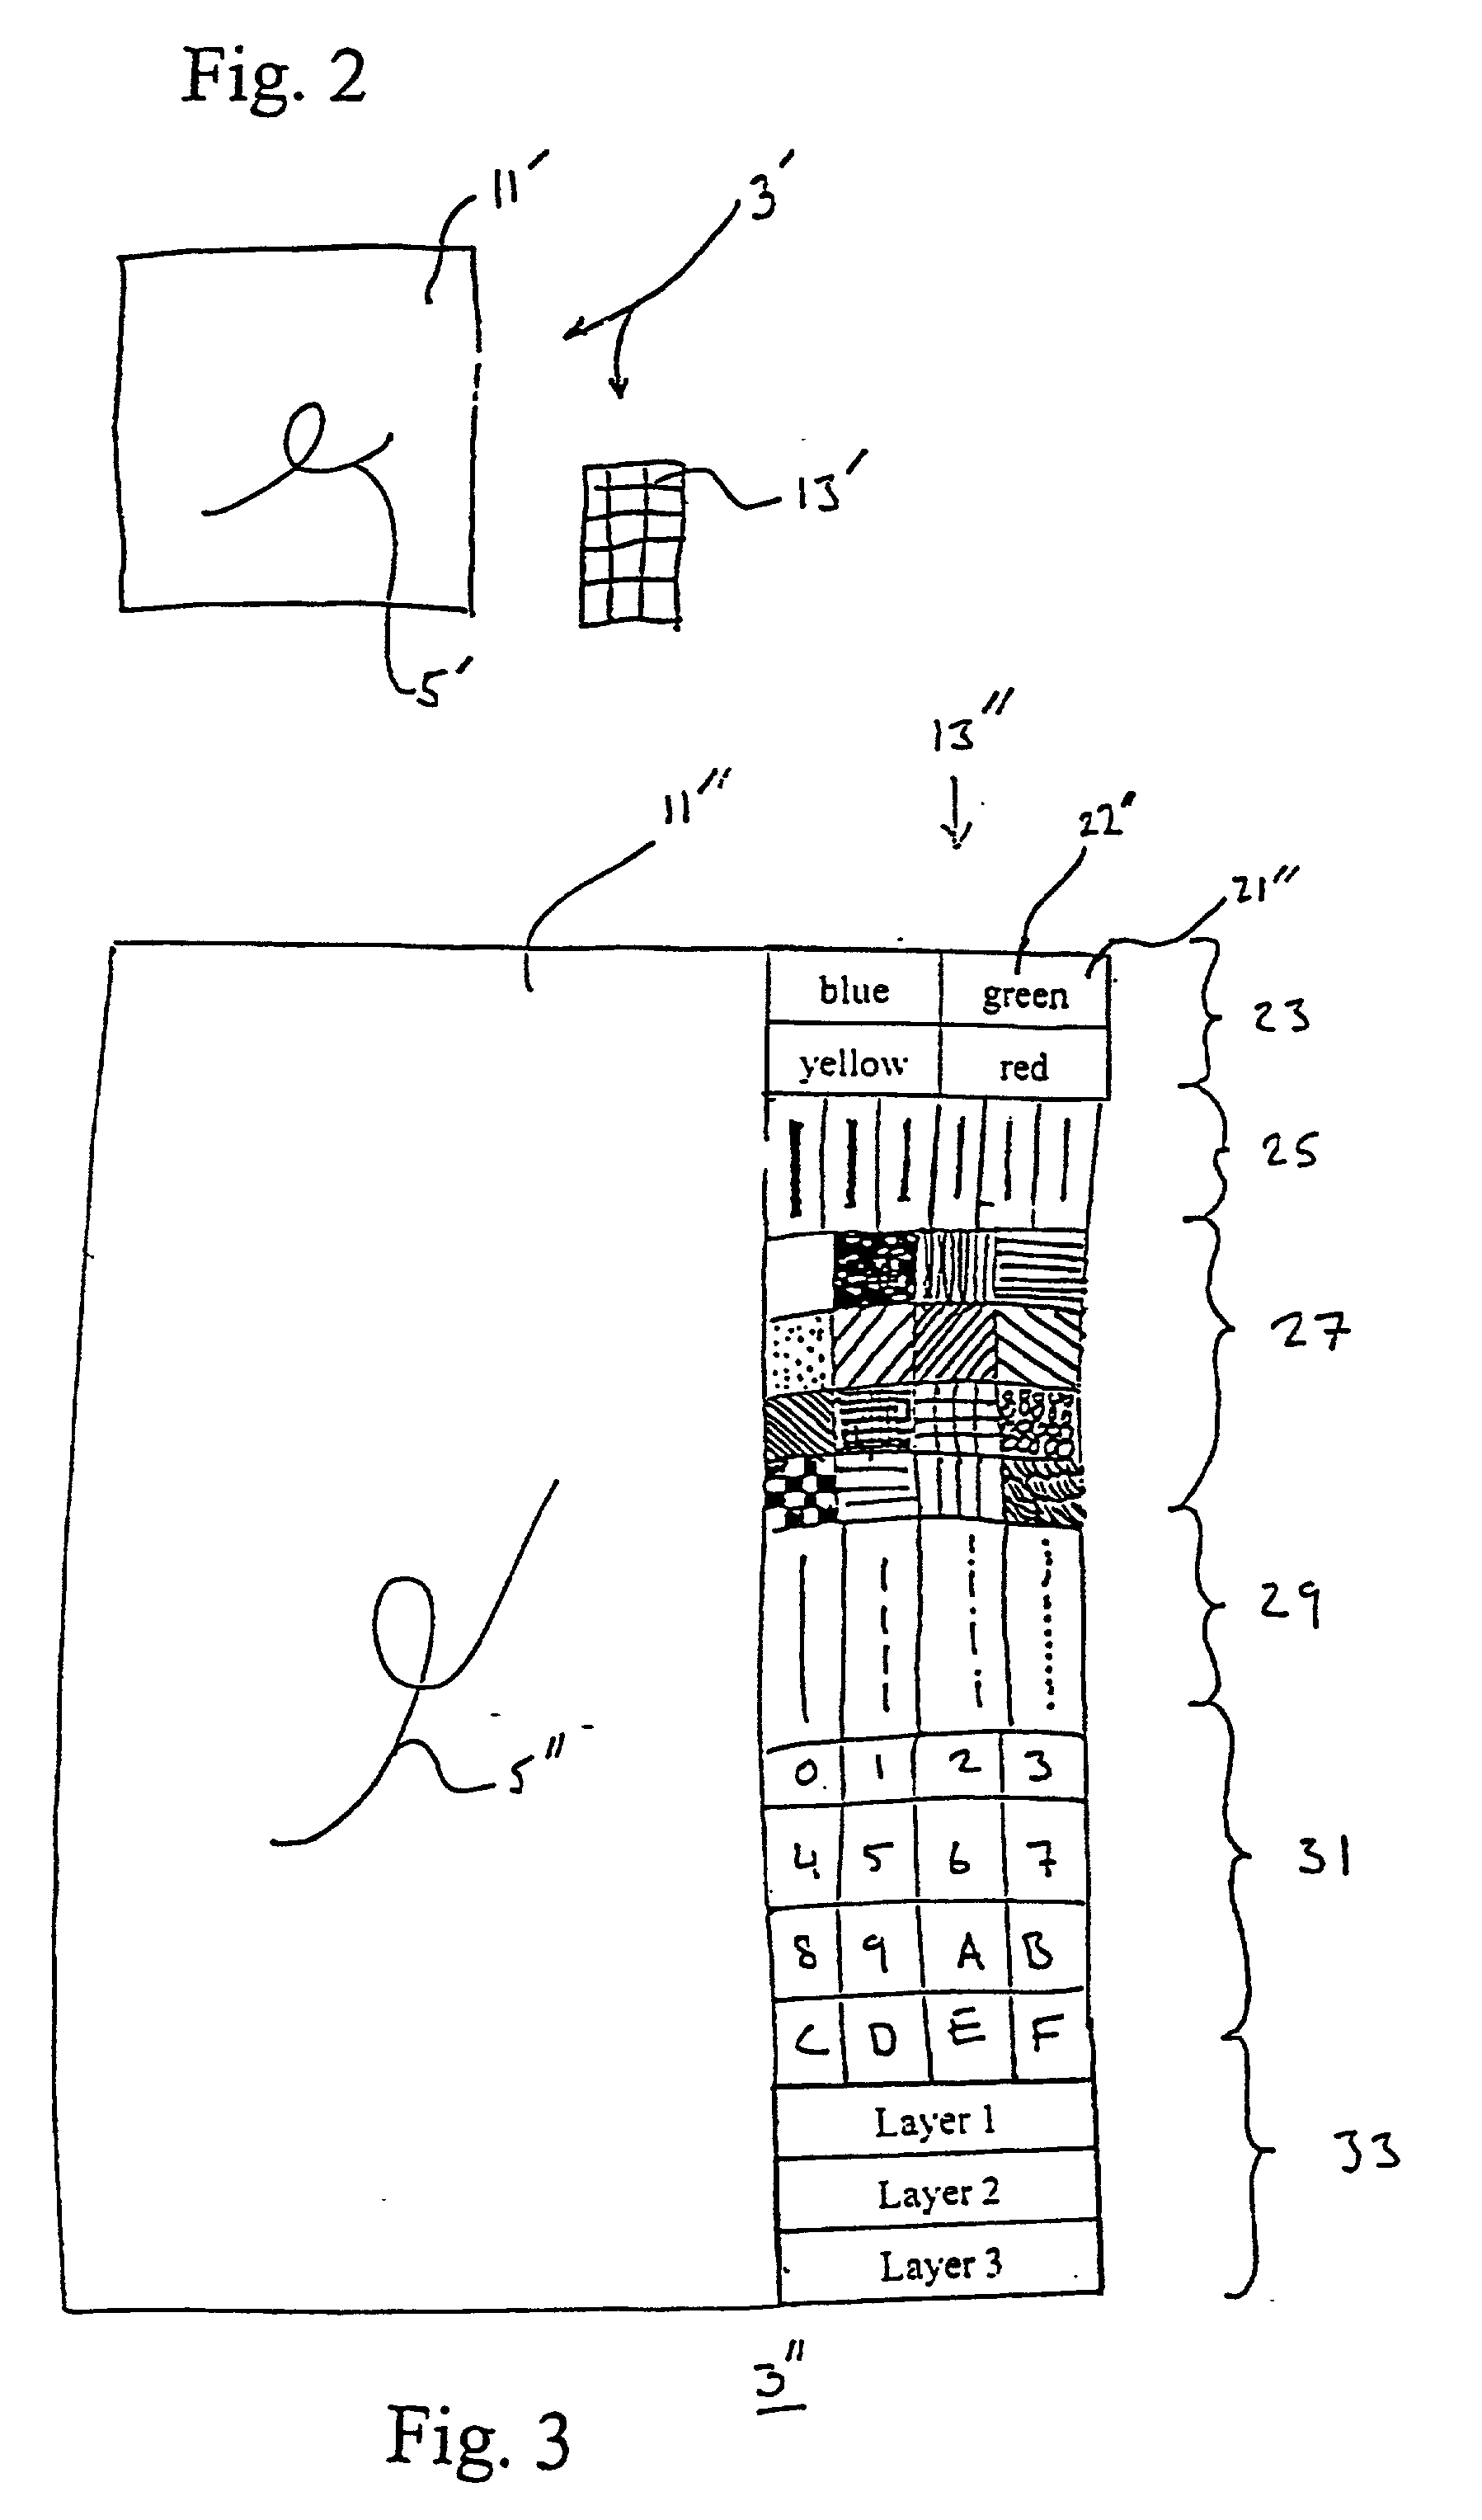 Method and system for digitizing freehand graphics with user-selected properties